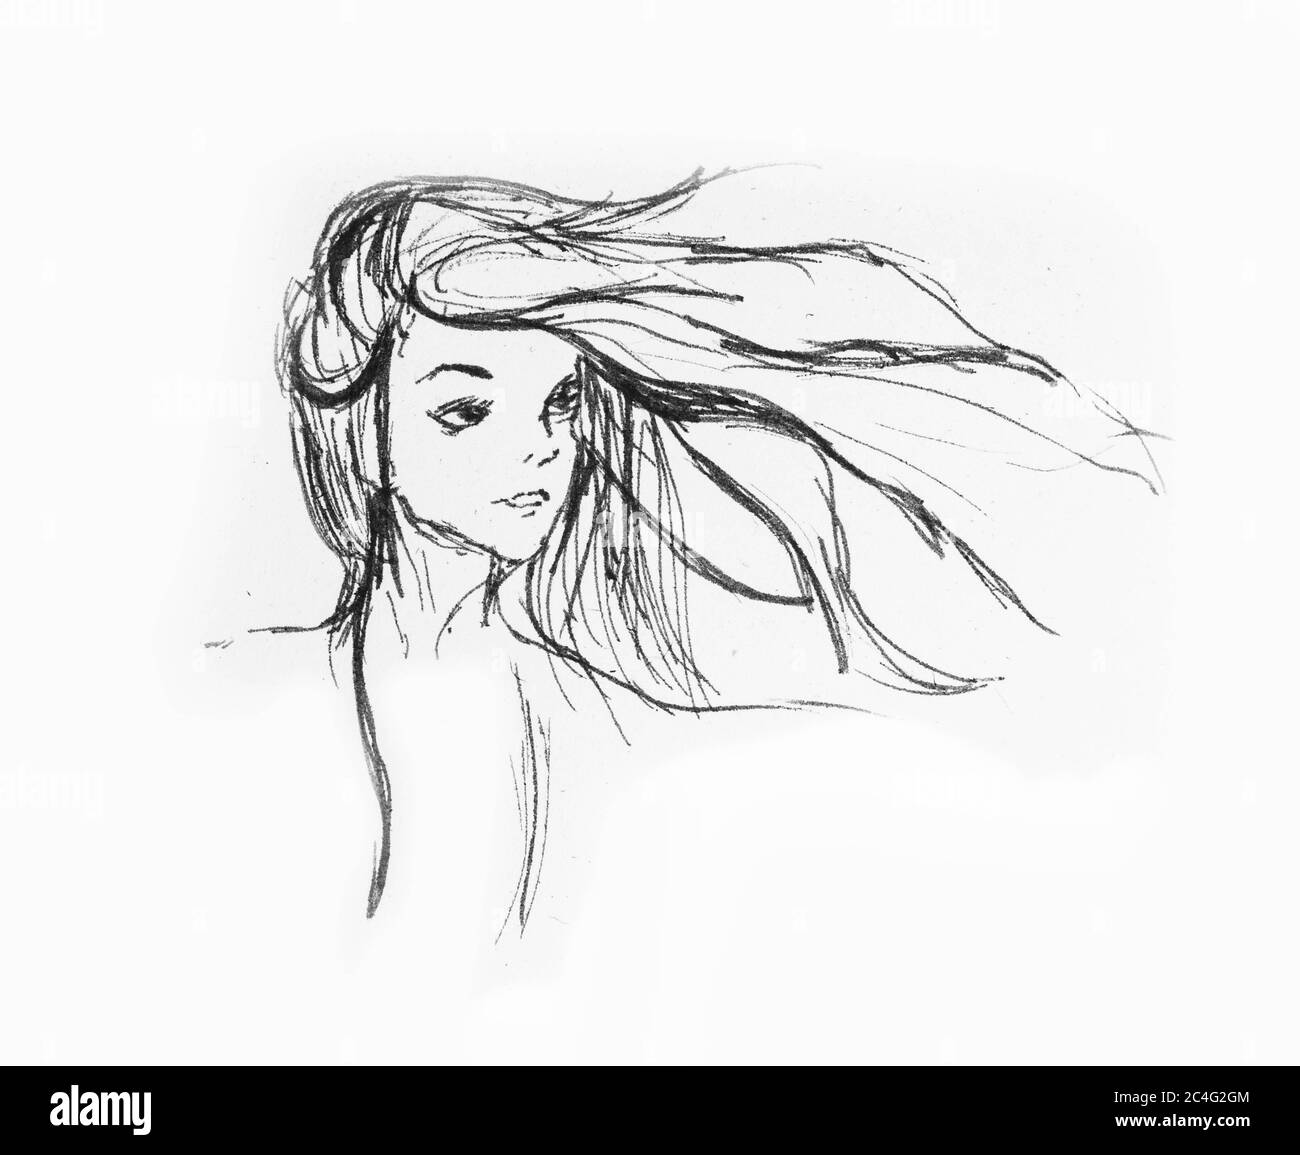 Hand Drawn Beautiful Girl Portrait - Hair Flying With The Wind On A White Paper Stock Photo